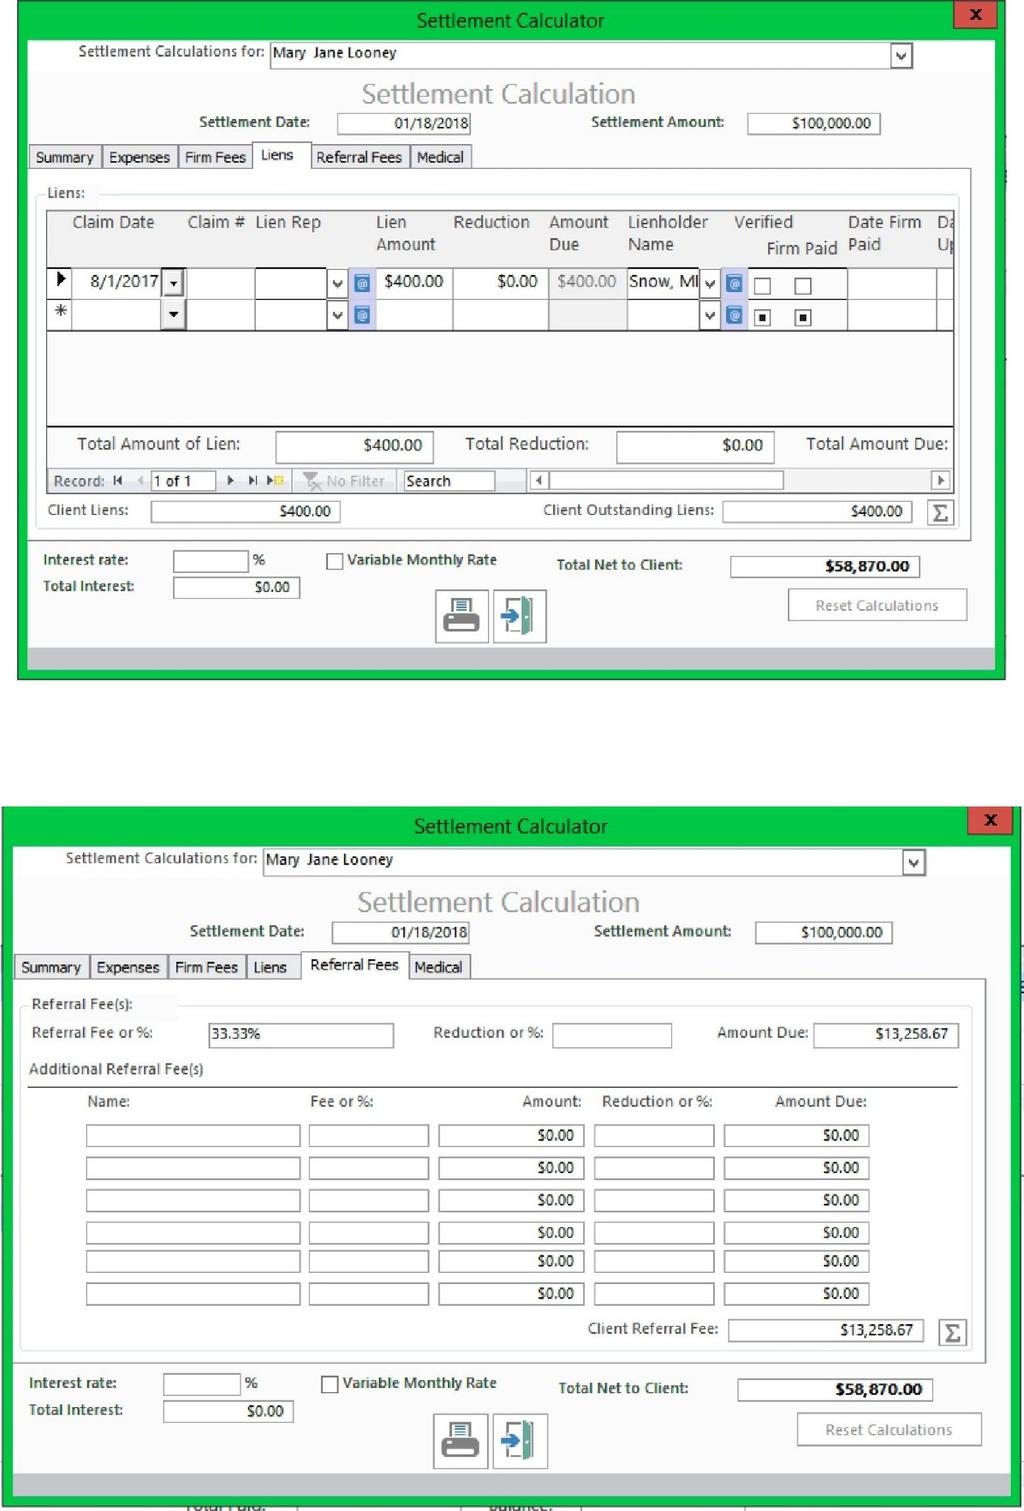 The Liens Tab automatically calculated from Liens that were entered on the Insurance/Liens Tab The Referral Fees Tab automatically